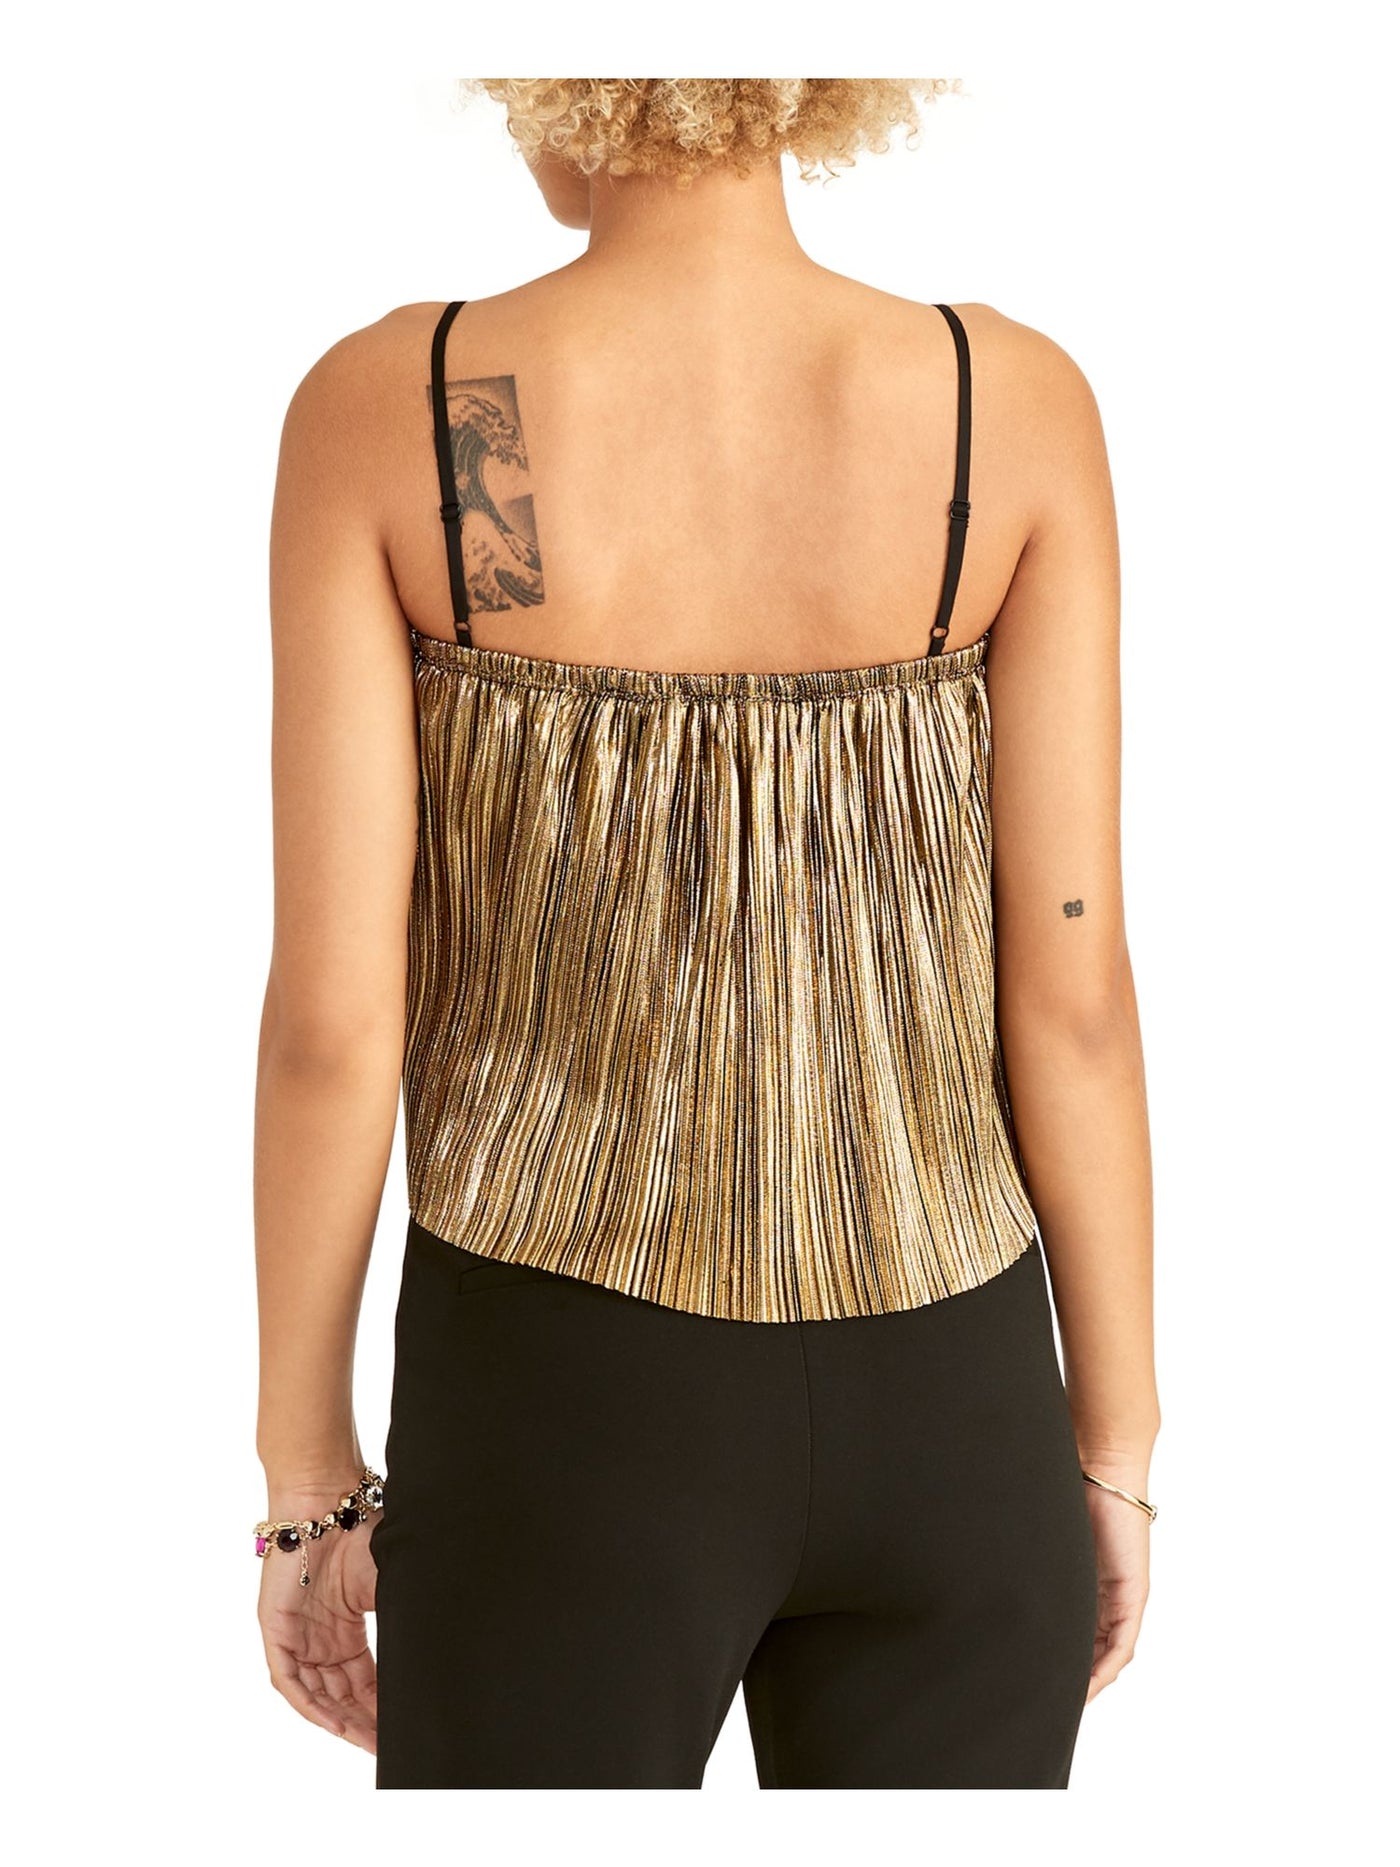 RACHEL ROY Womens Gold Shimmer Striped Spaghetti Strap Square Neck Cocktail Crop Top L